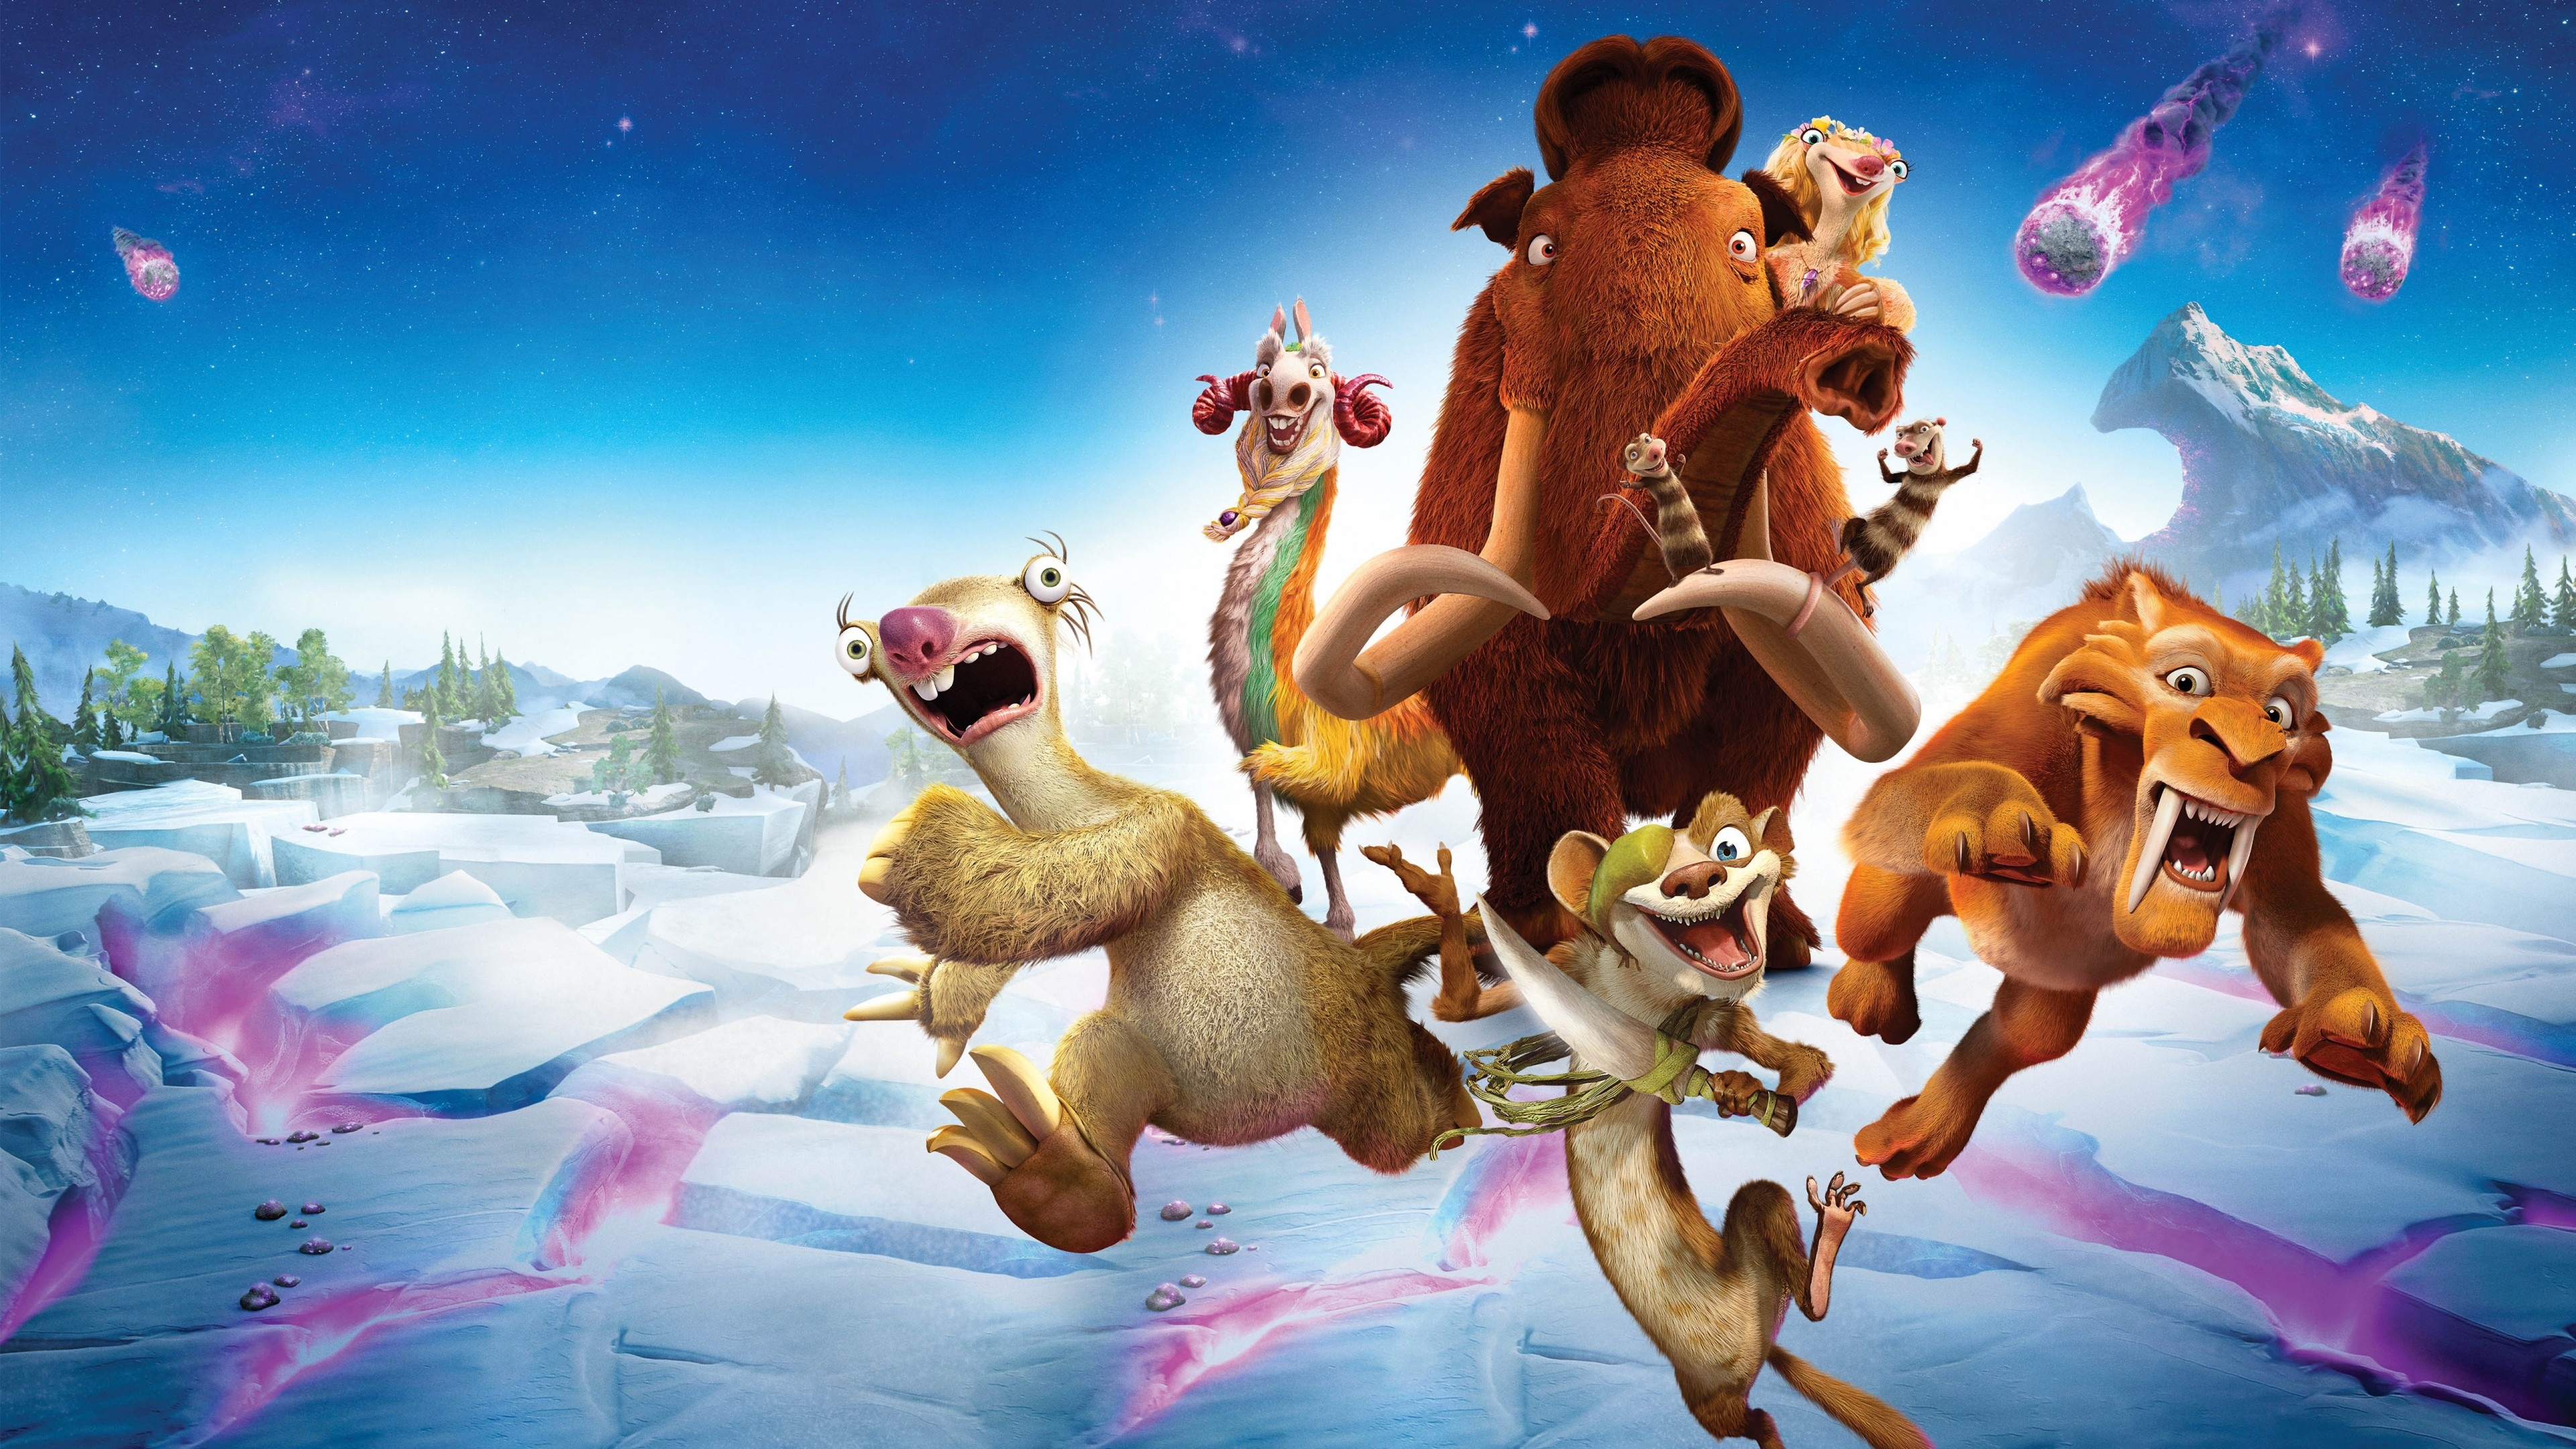 Ice Age 5 collision course, Sid and the mammoths, Best animations of 2016, Epic space movies, 3840x2160 4K Desktop